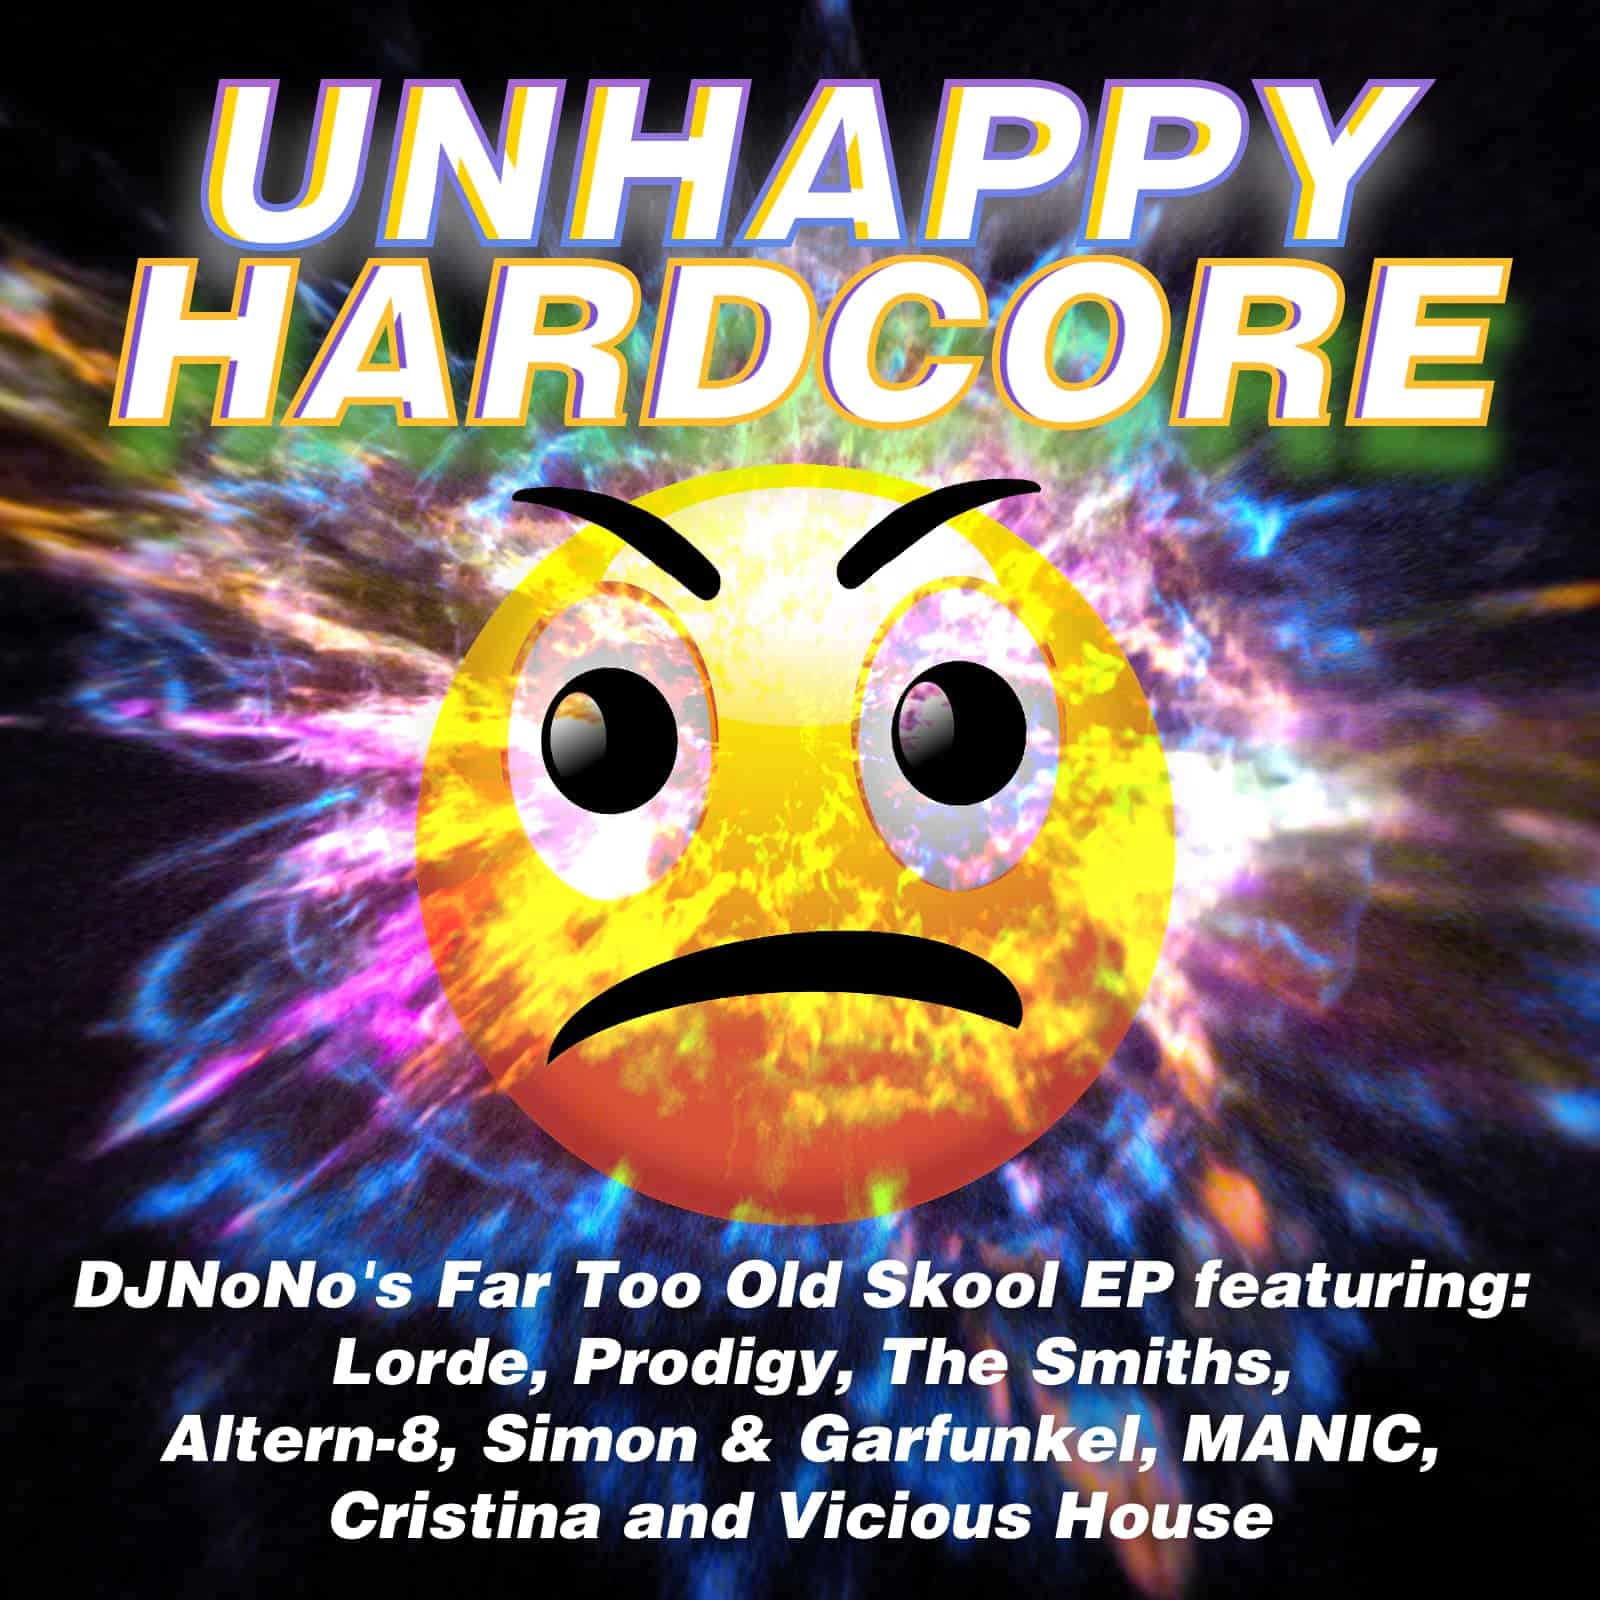 unhappyhardcore ep - Radio Clash Podcast DJNoNo - Unhappy Hardcore Radio Clash Music Mashup Podcast brings you the best in eclectic tunes, mashups and remixes from around the world. Since 2004, we've been bringing you the freshest and most innovative music from a diverse range of genres and cultures. Join us on our musical journey as we explore the sounds of yesterday, today, and tomorrow. Discover new music and be inspired by the mashup of musical styles that only Radio Clash can provide. Subscribe now to elevate your musical experience!